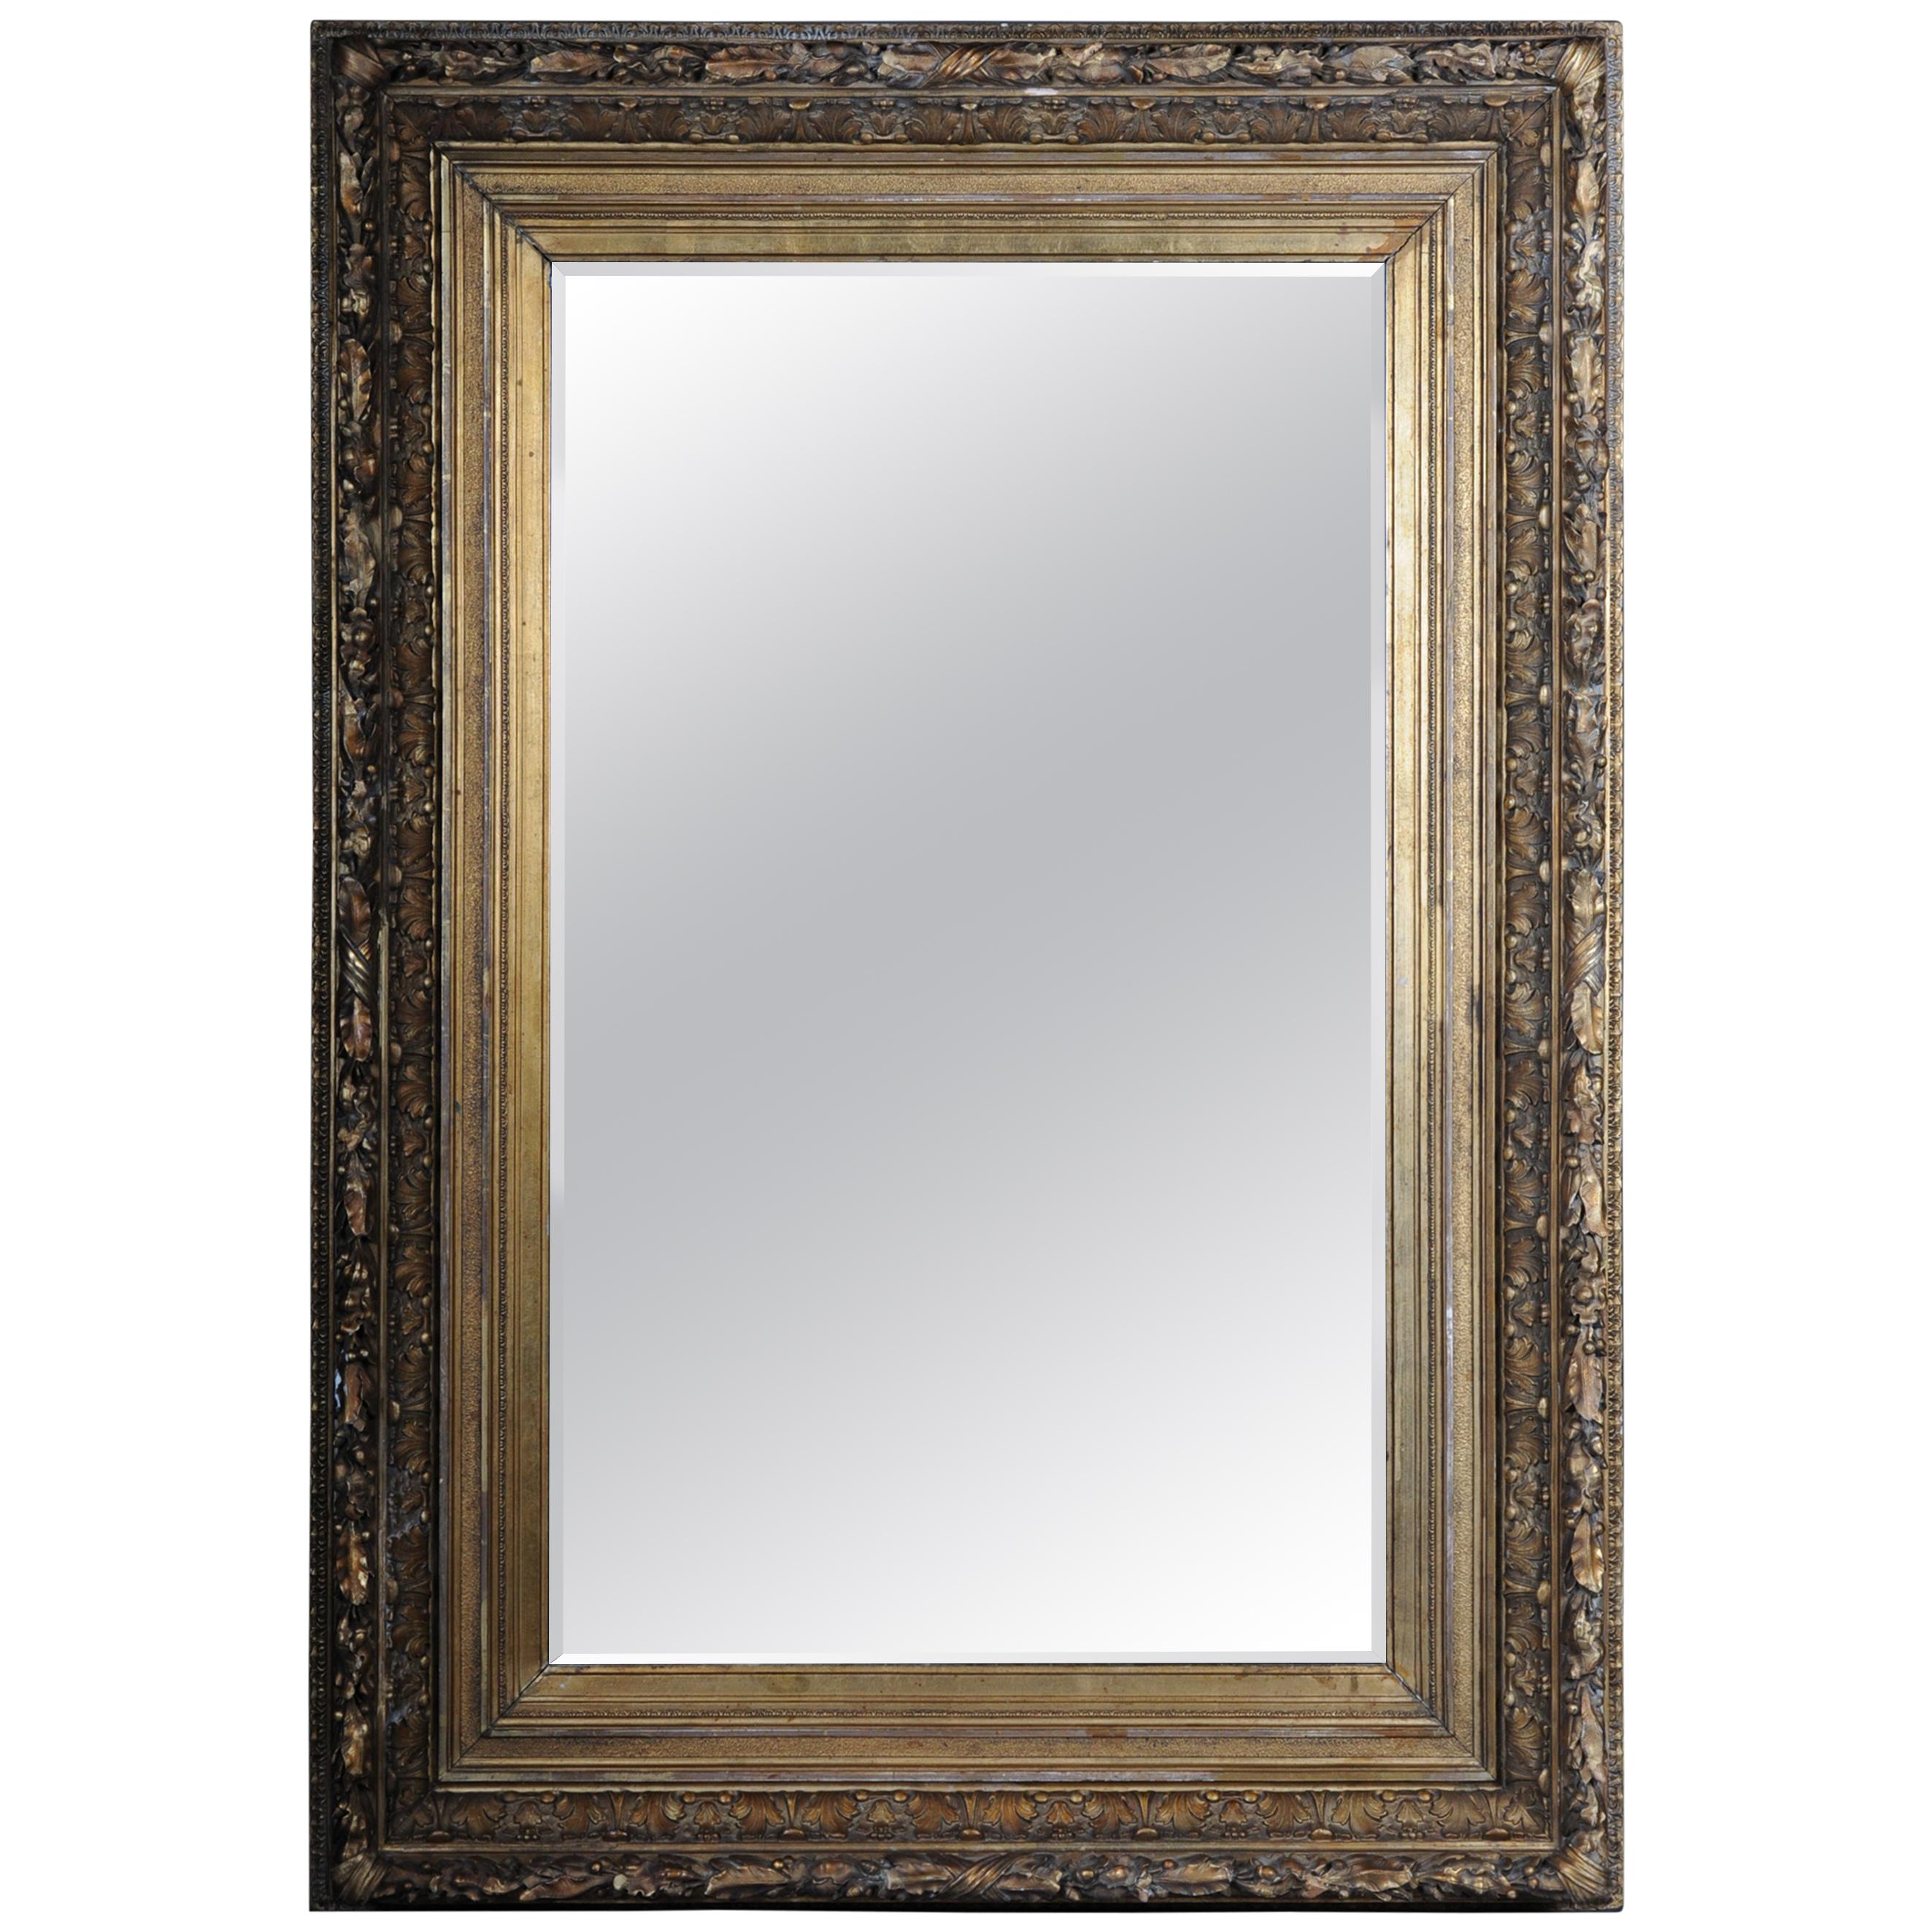 19th Century Ornate Wall Mirror Gold Frame, Gilded, circa 1870 For Sale